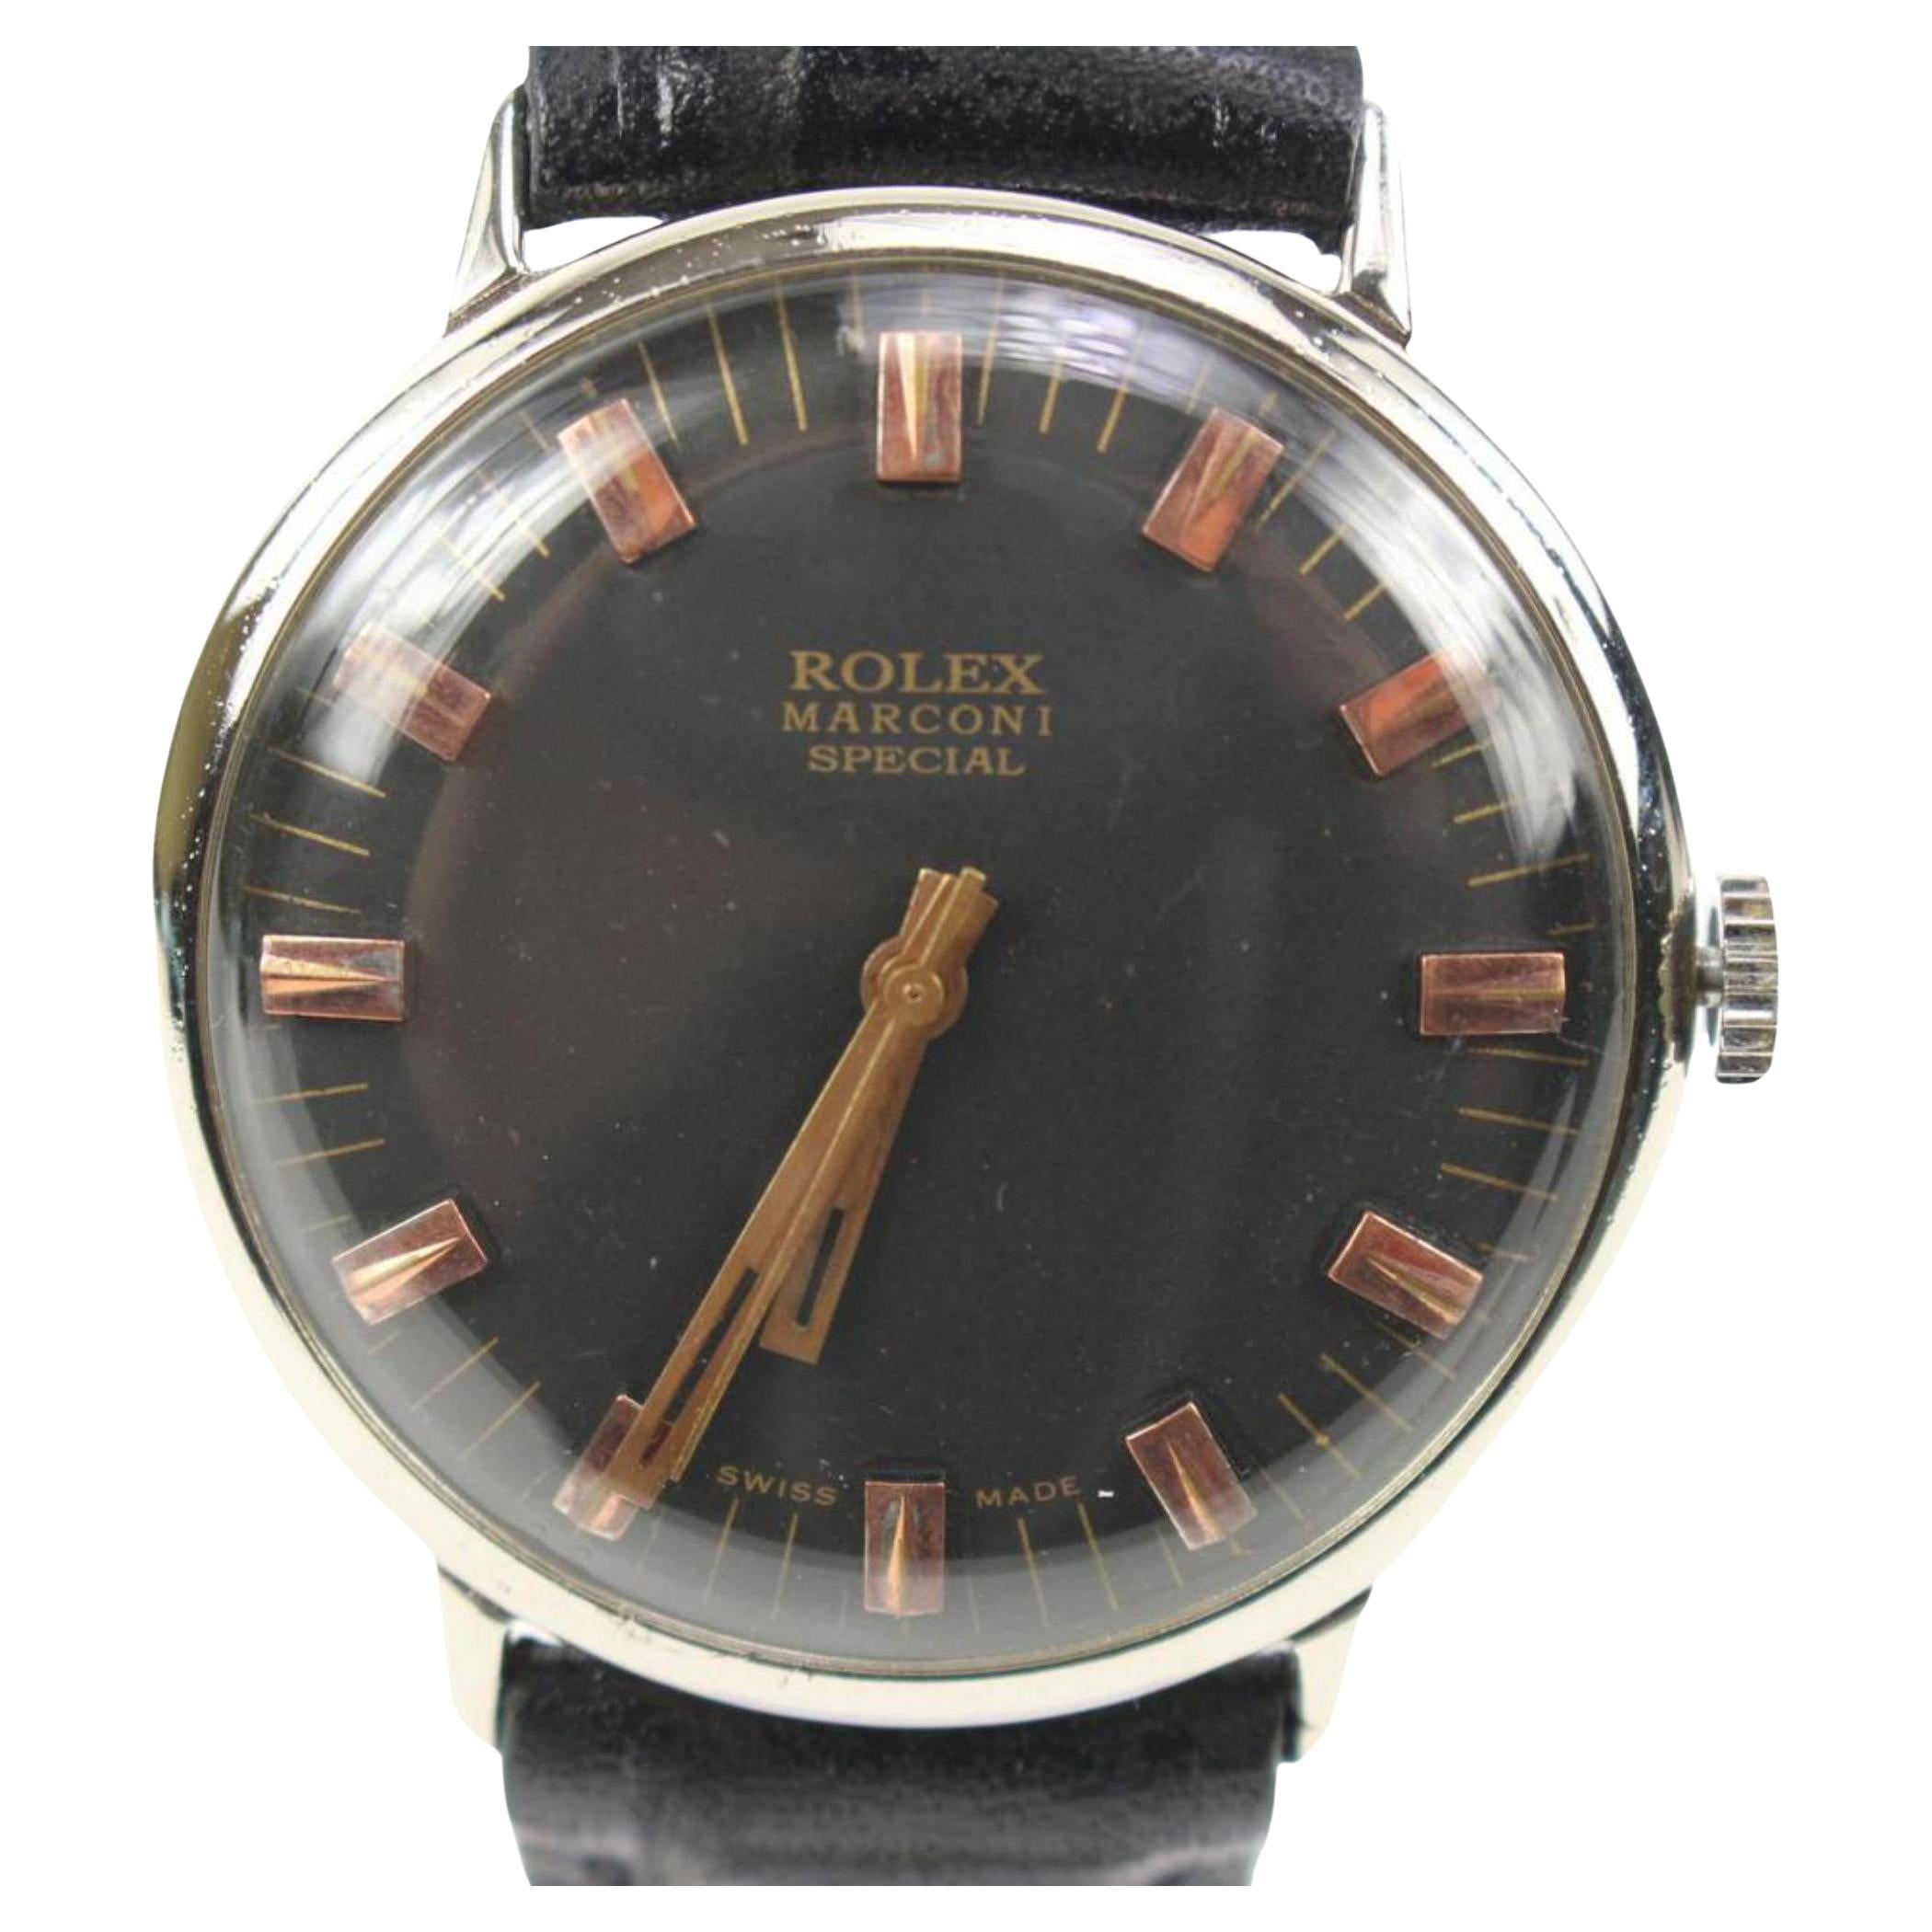 Rolex 1930 Marconi Special Black x Nickel Plated 34mm Watch 15r222s